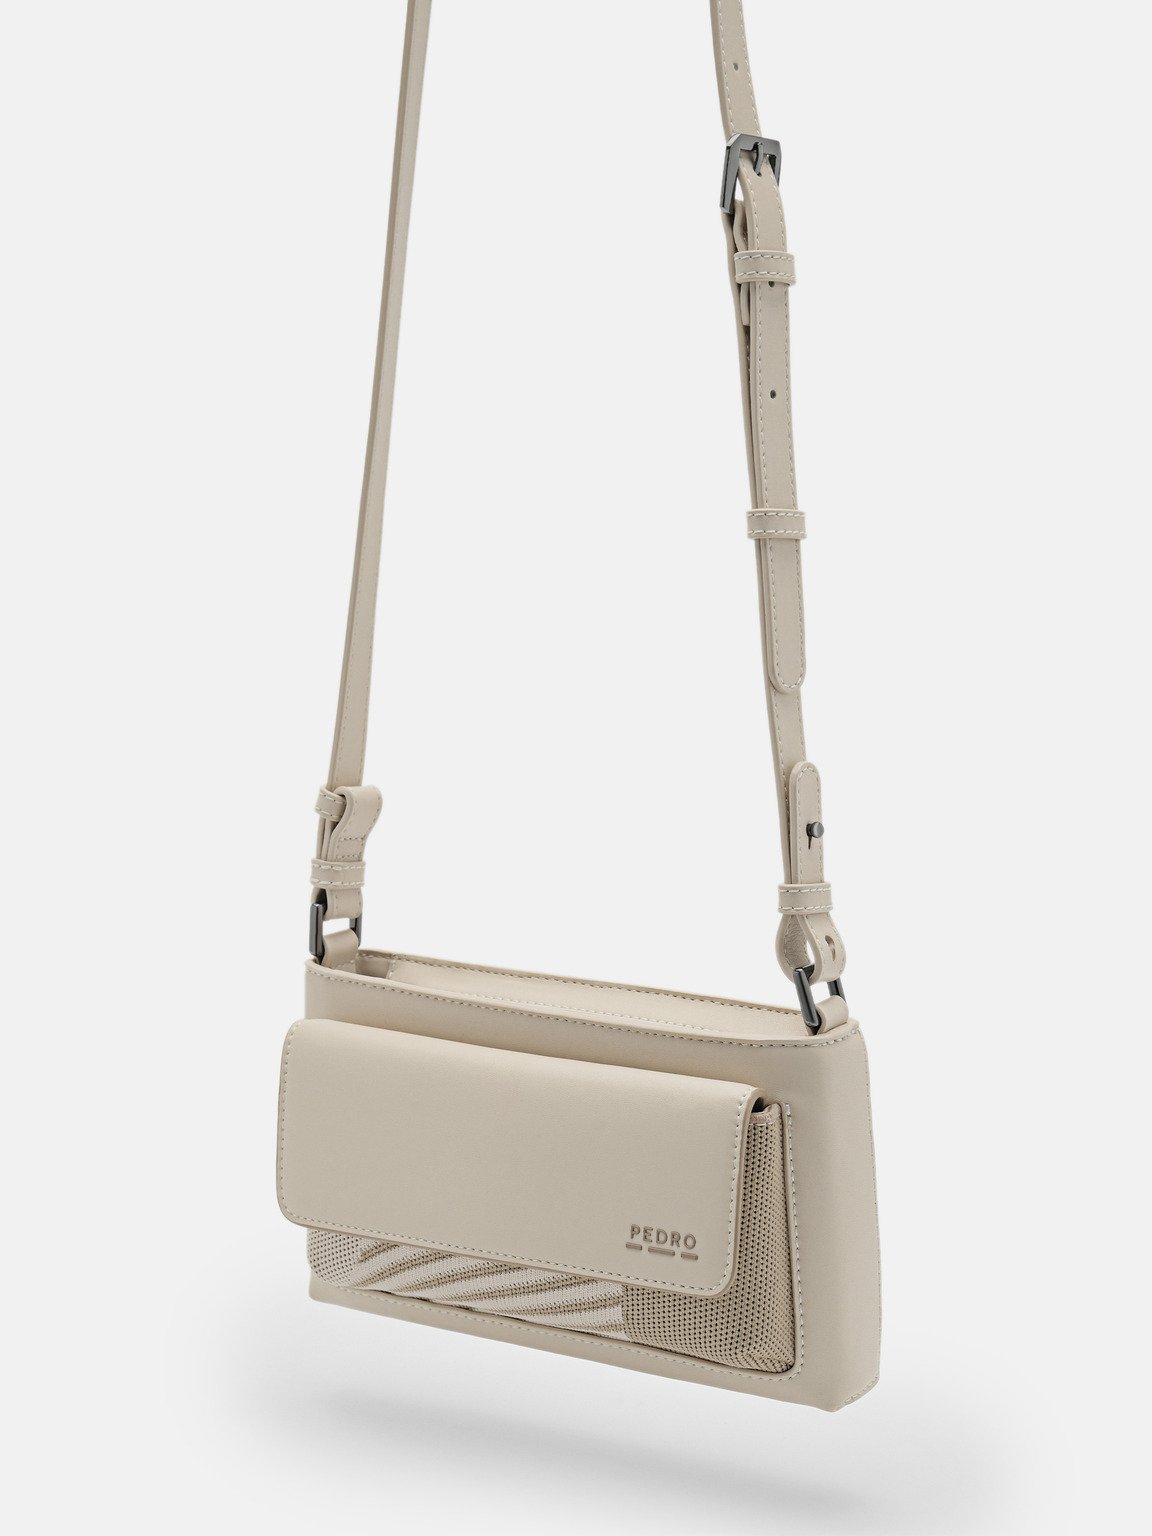 rePEDRO Recycled Leather Mini Sling Bag, Sand